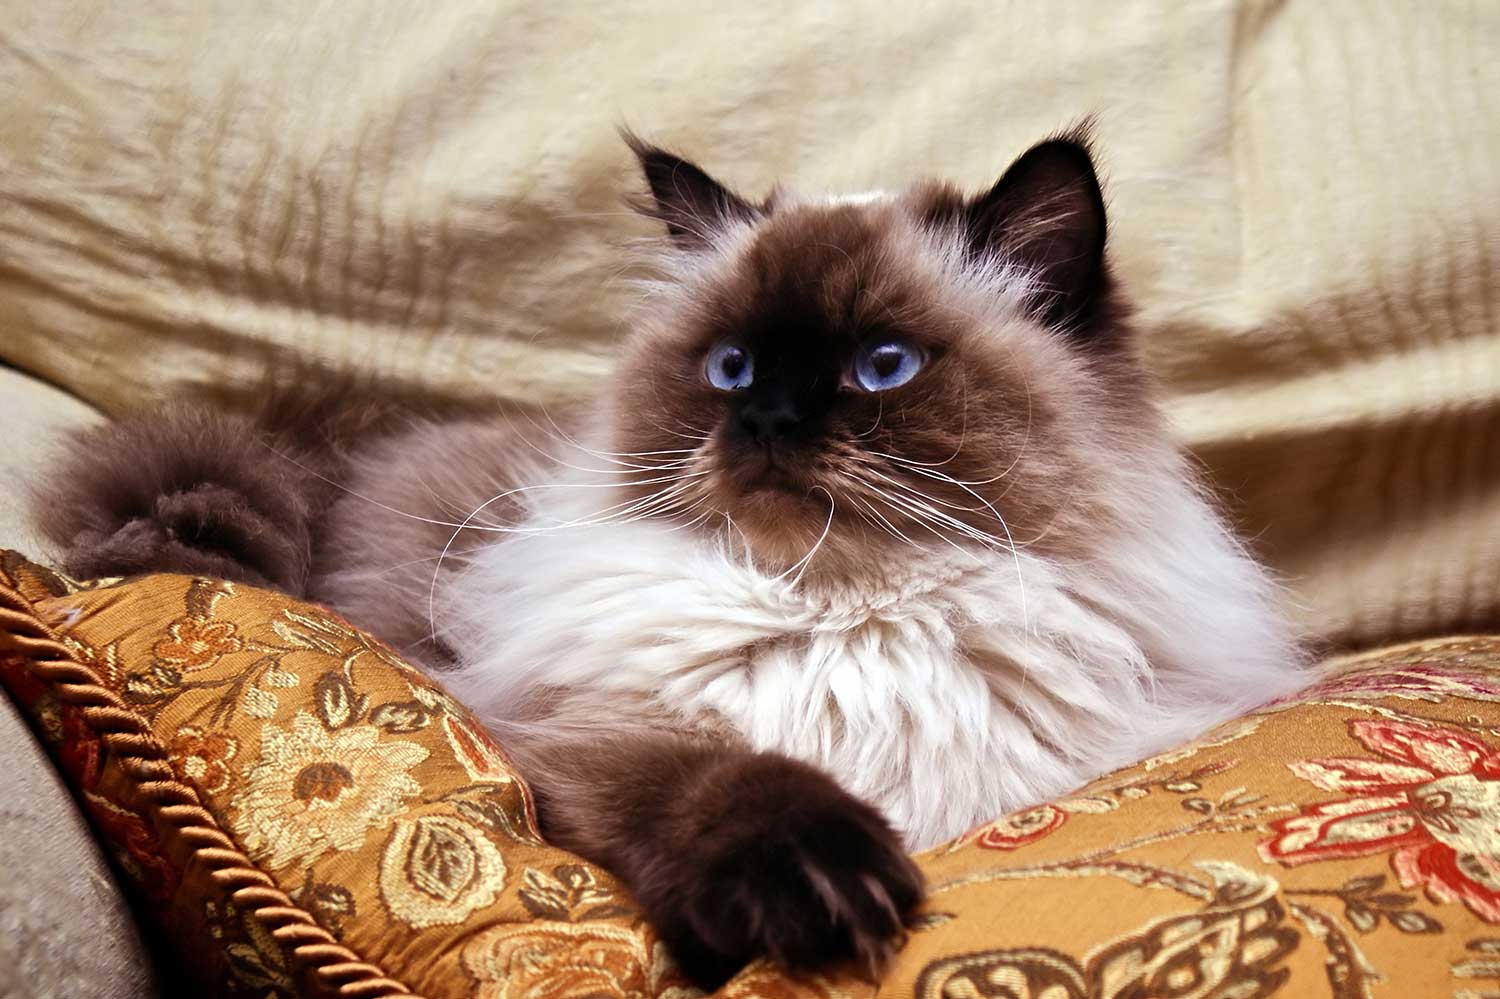 The Himalayan cat breed was developed by crossing Persian and Siamese cats